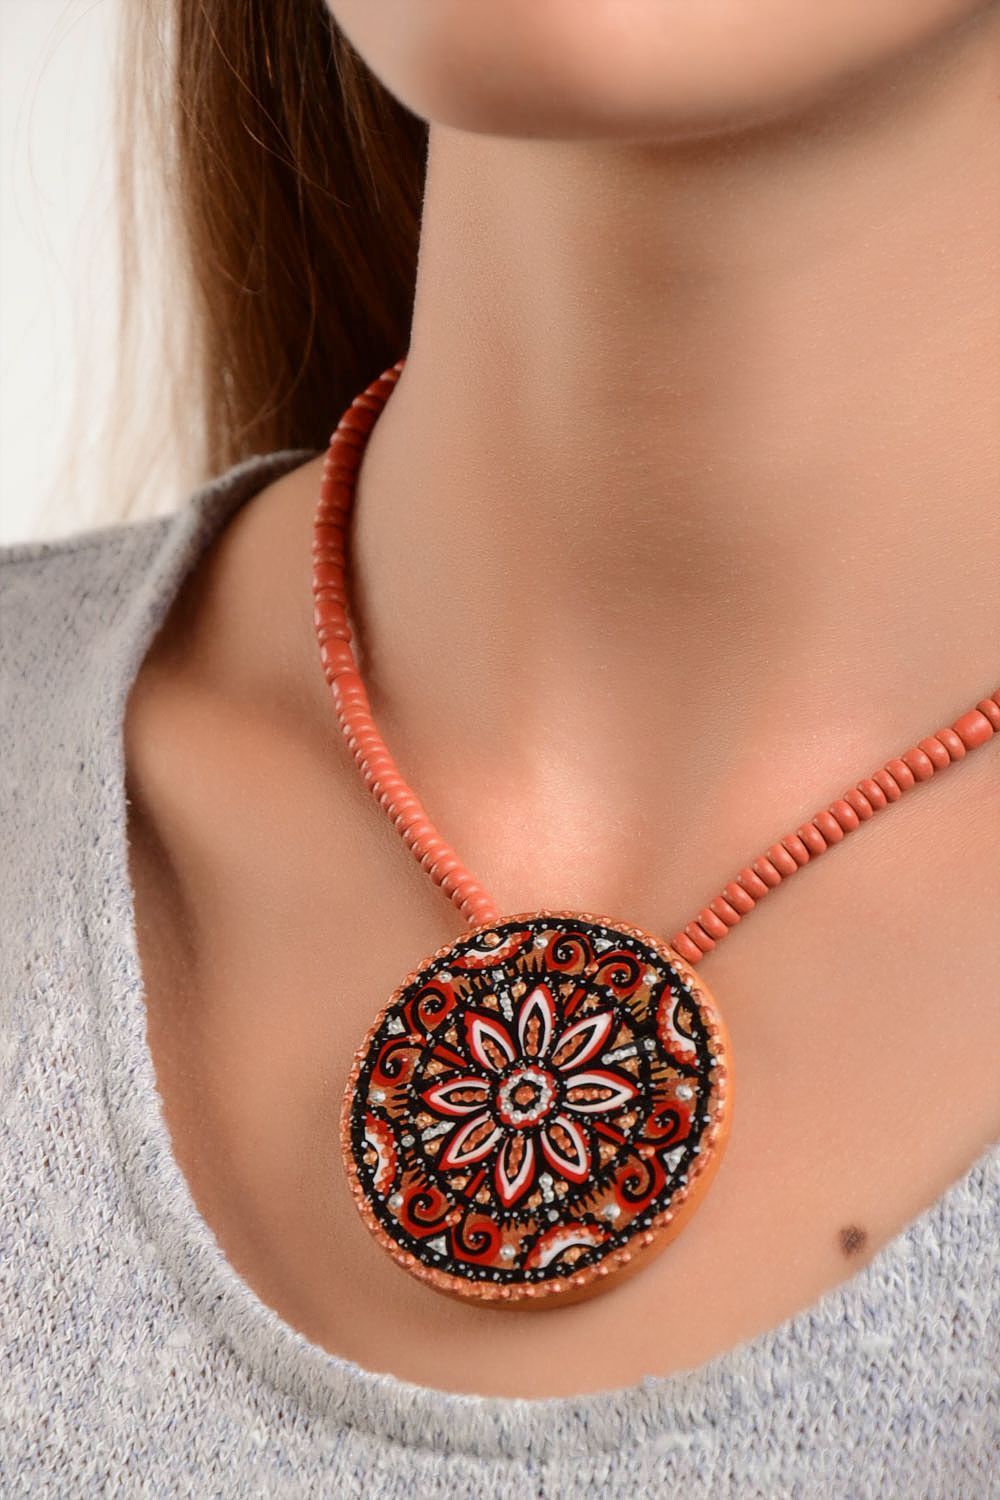 Ethnic jewelry handmade necklace ceramic jewelry pendant necklace gifts for her photo 1